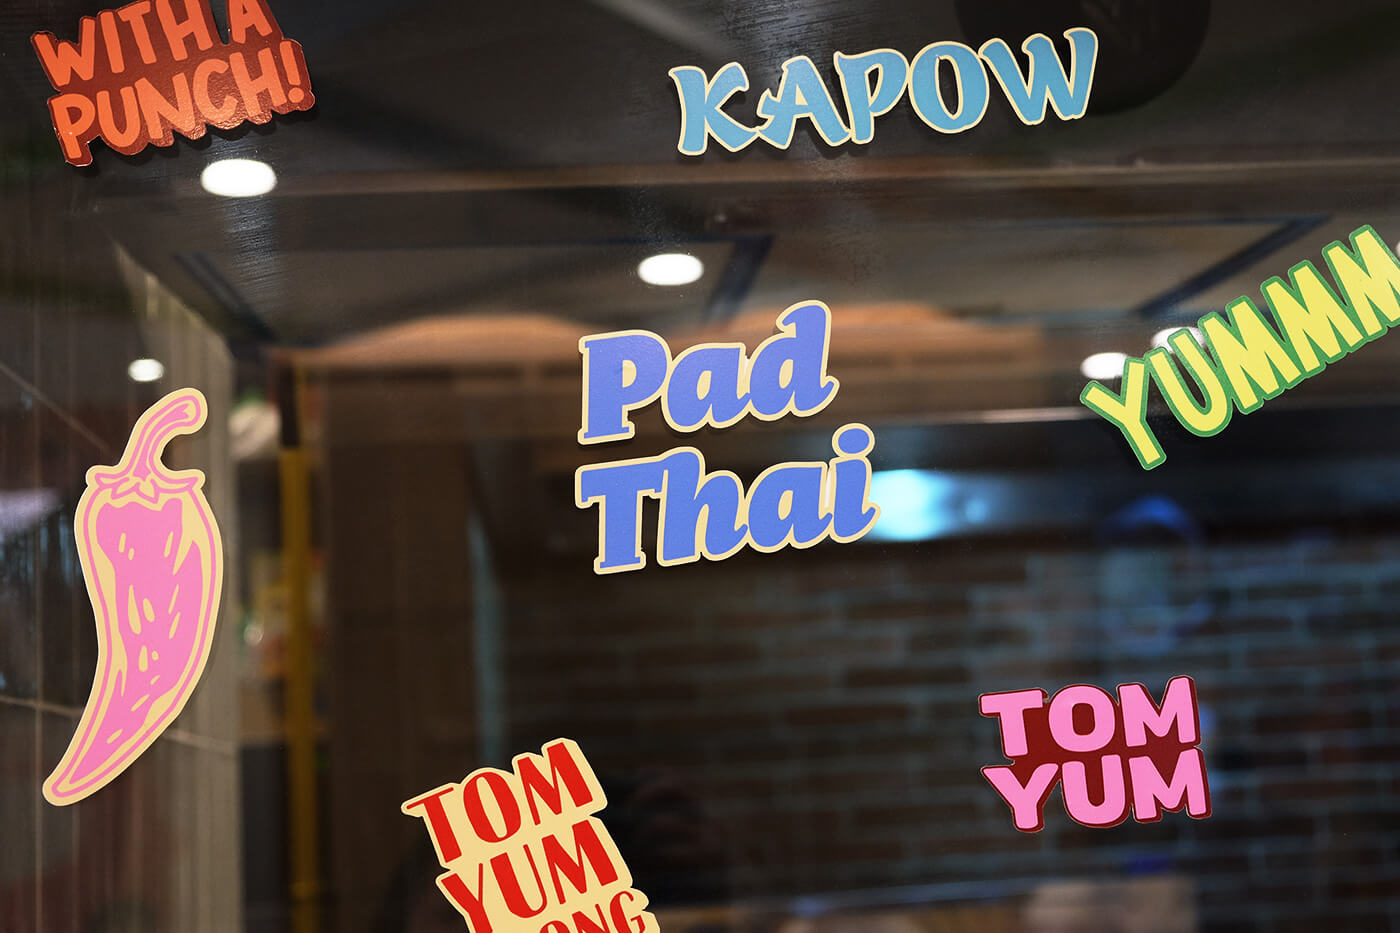 Typography decal stickers in the store front of Thai food and beverage brand Easy Tiger